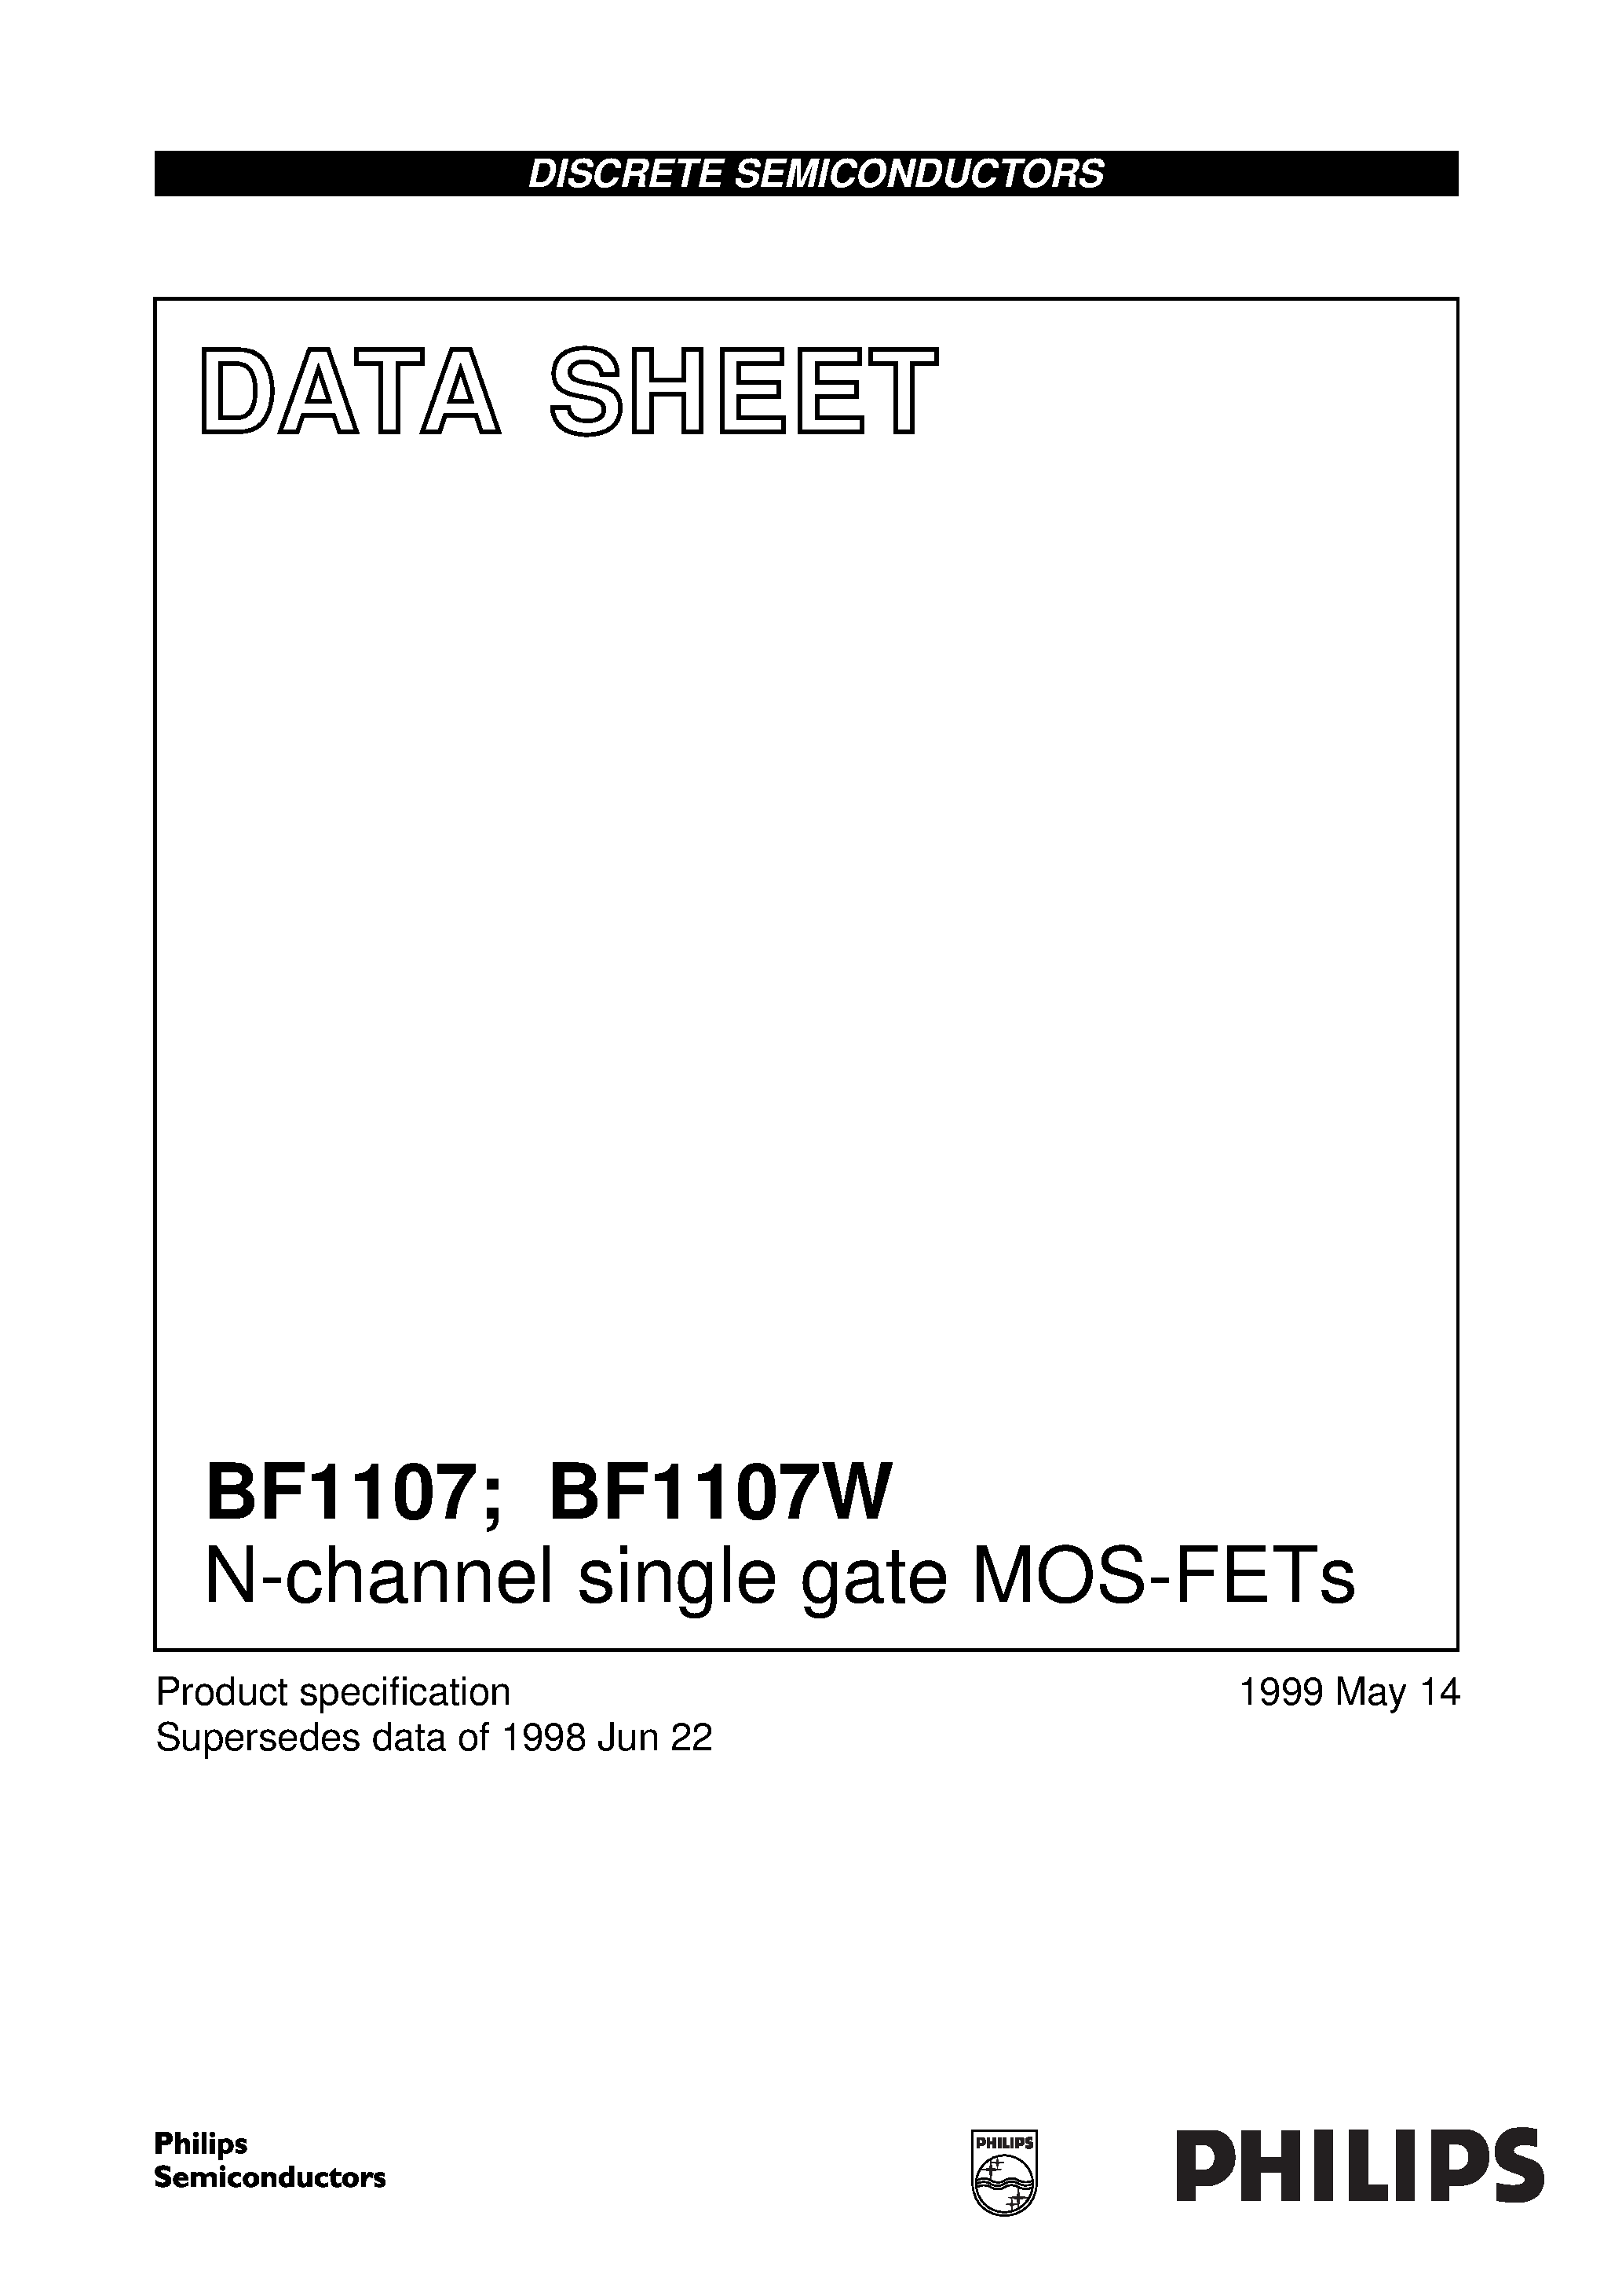 Datasheet BF1107 - N-channel single gate MOS-FETs page 1